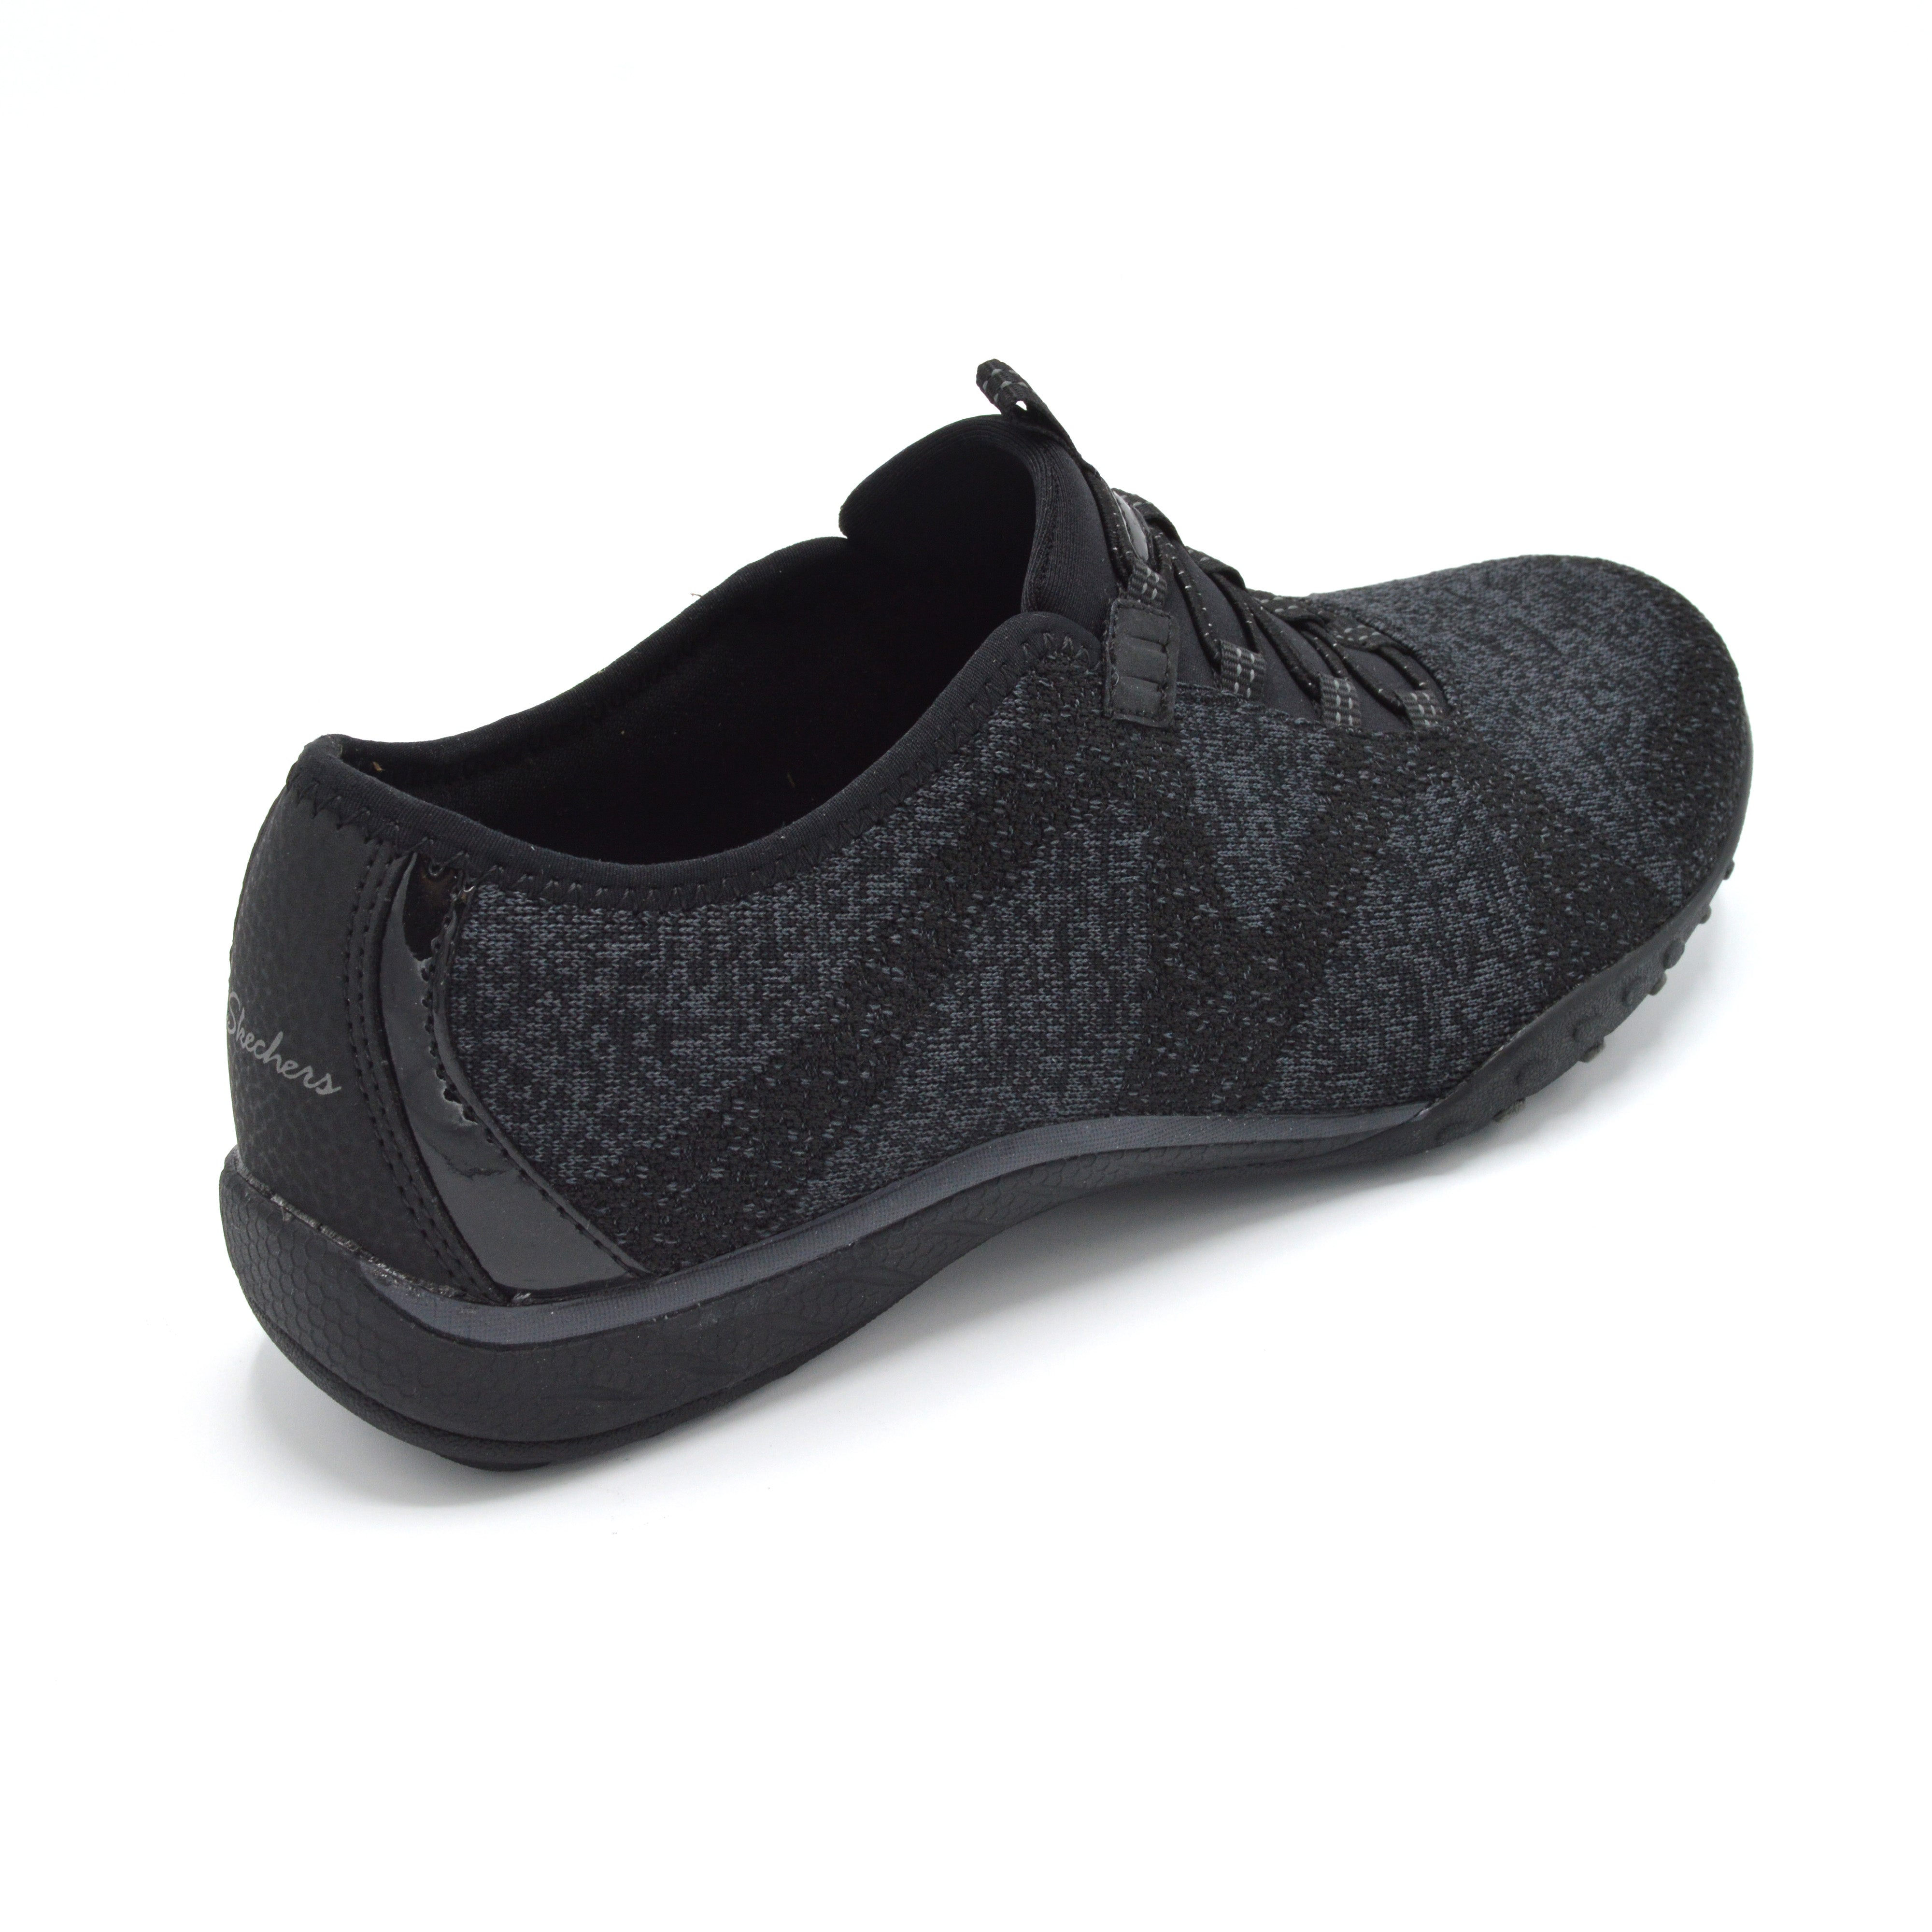 Extra Wide Slip On Trainer For Oedema